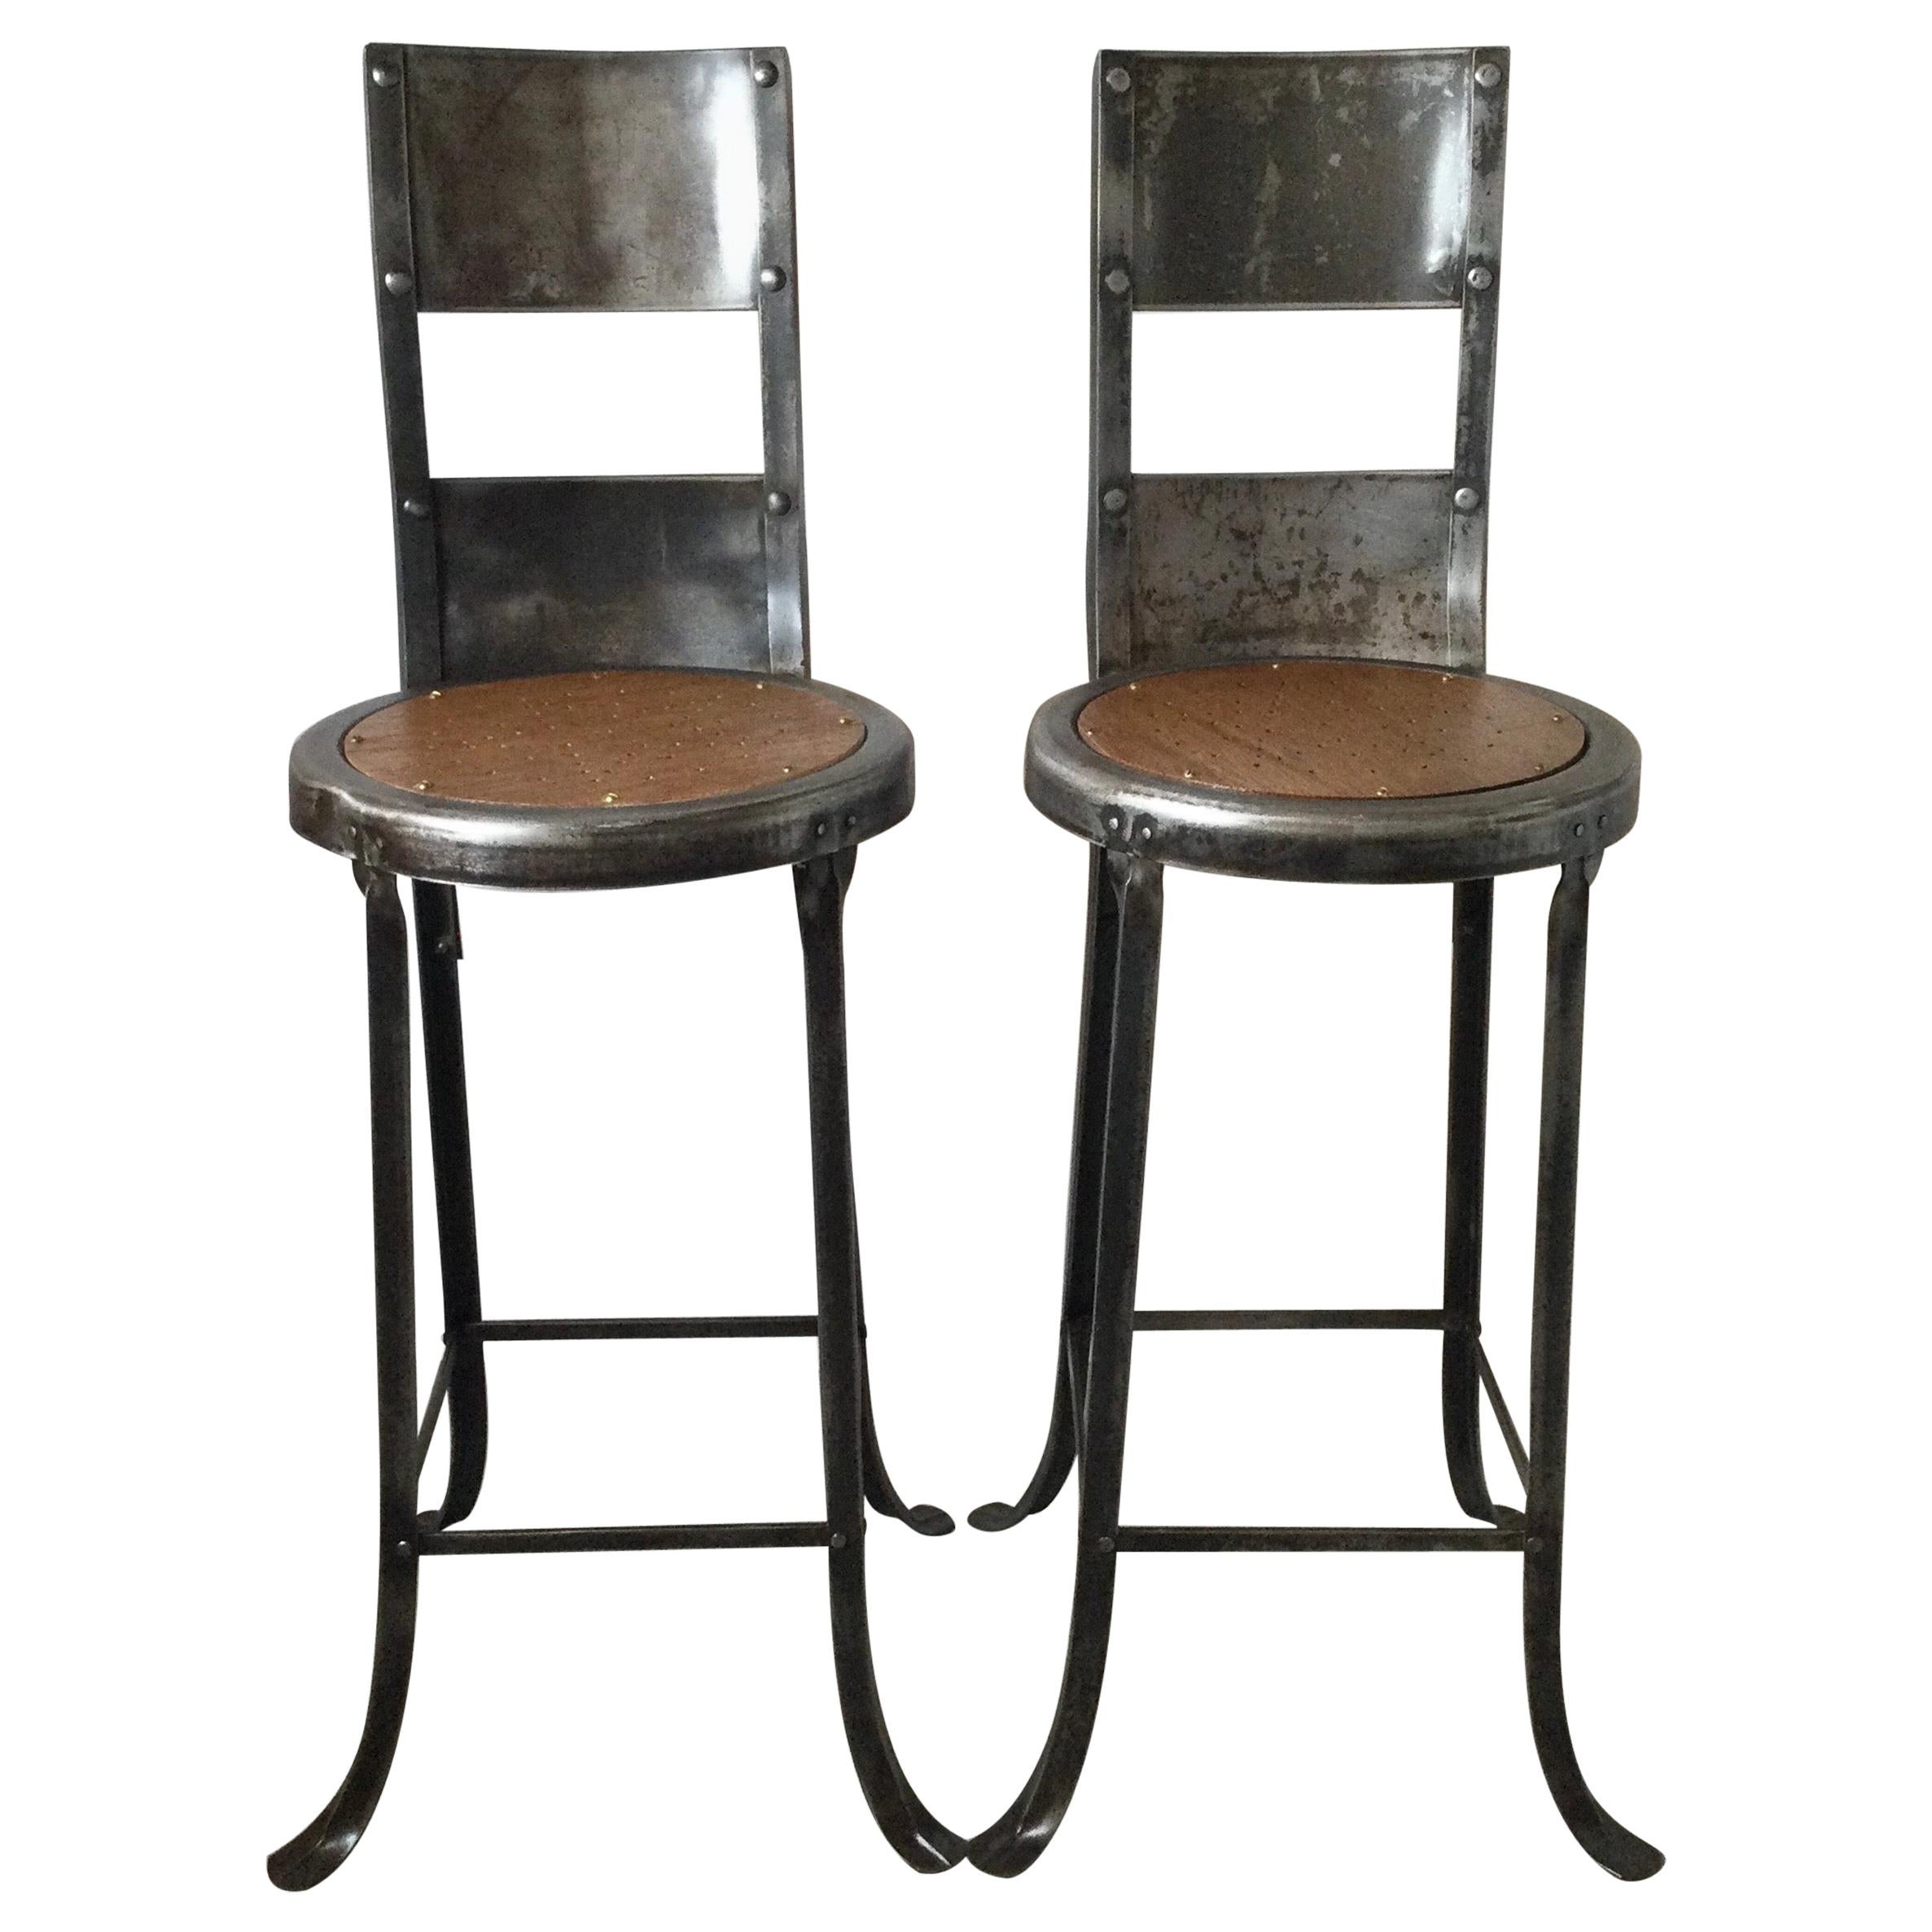 Unusual Pair of Early High Back Stools or Chairs